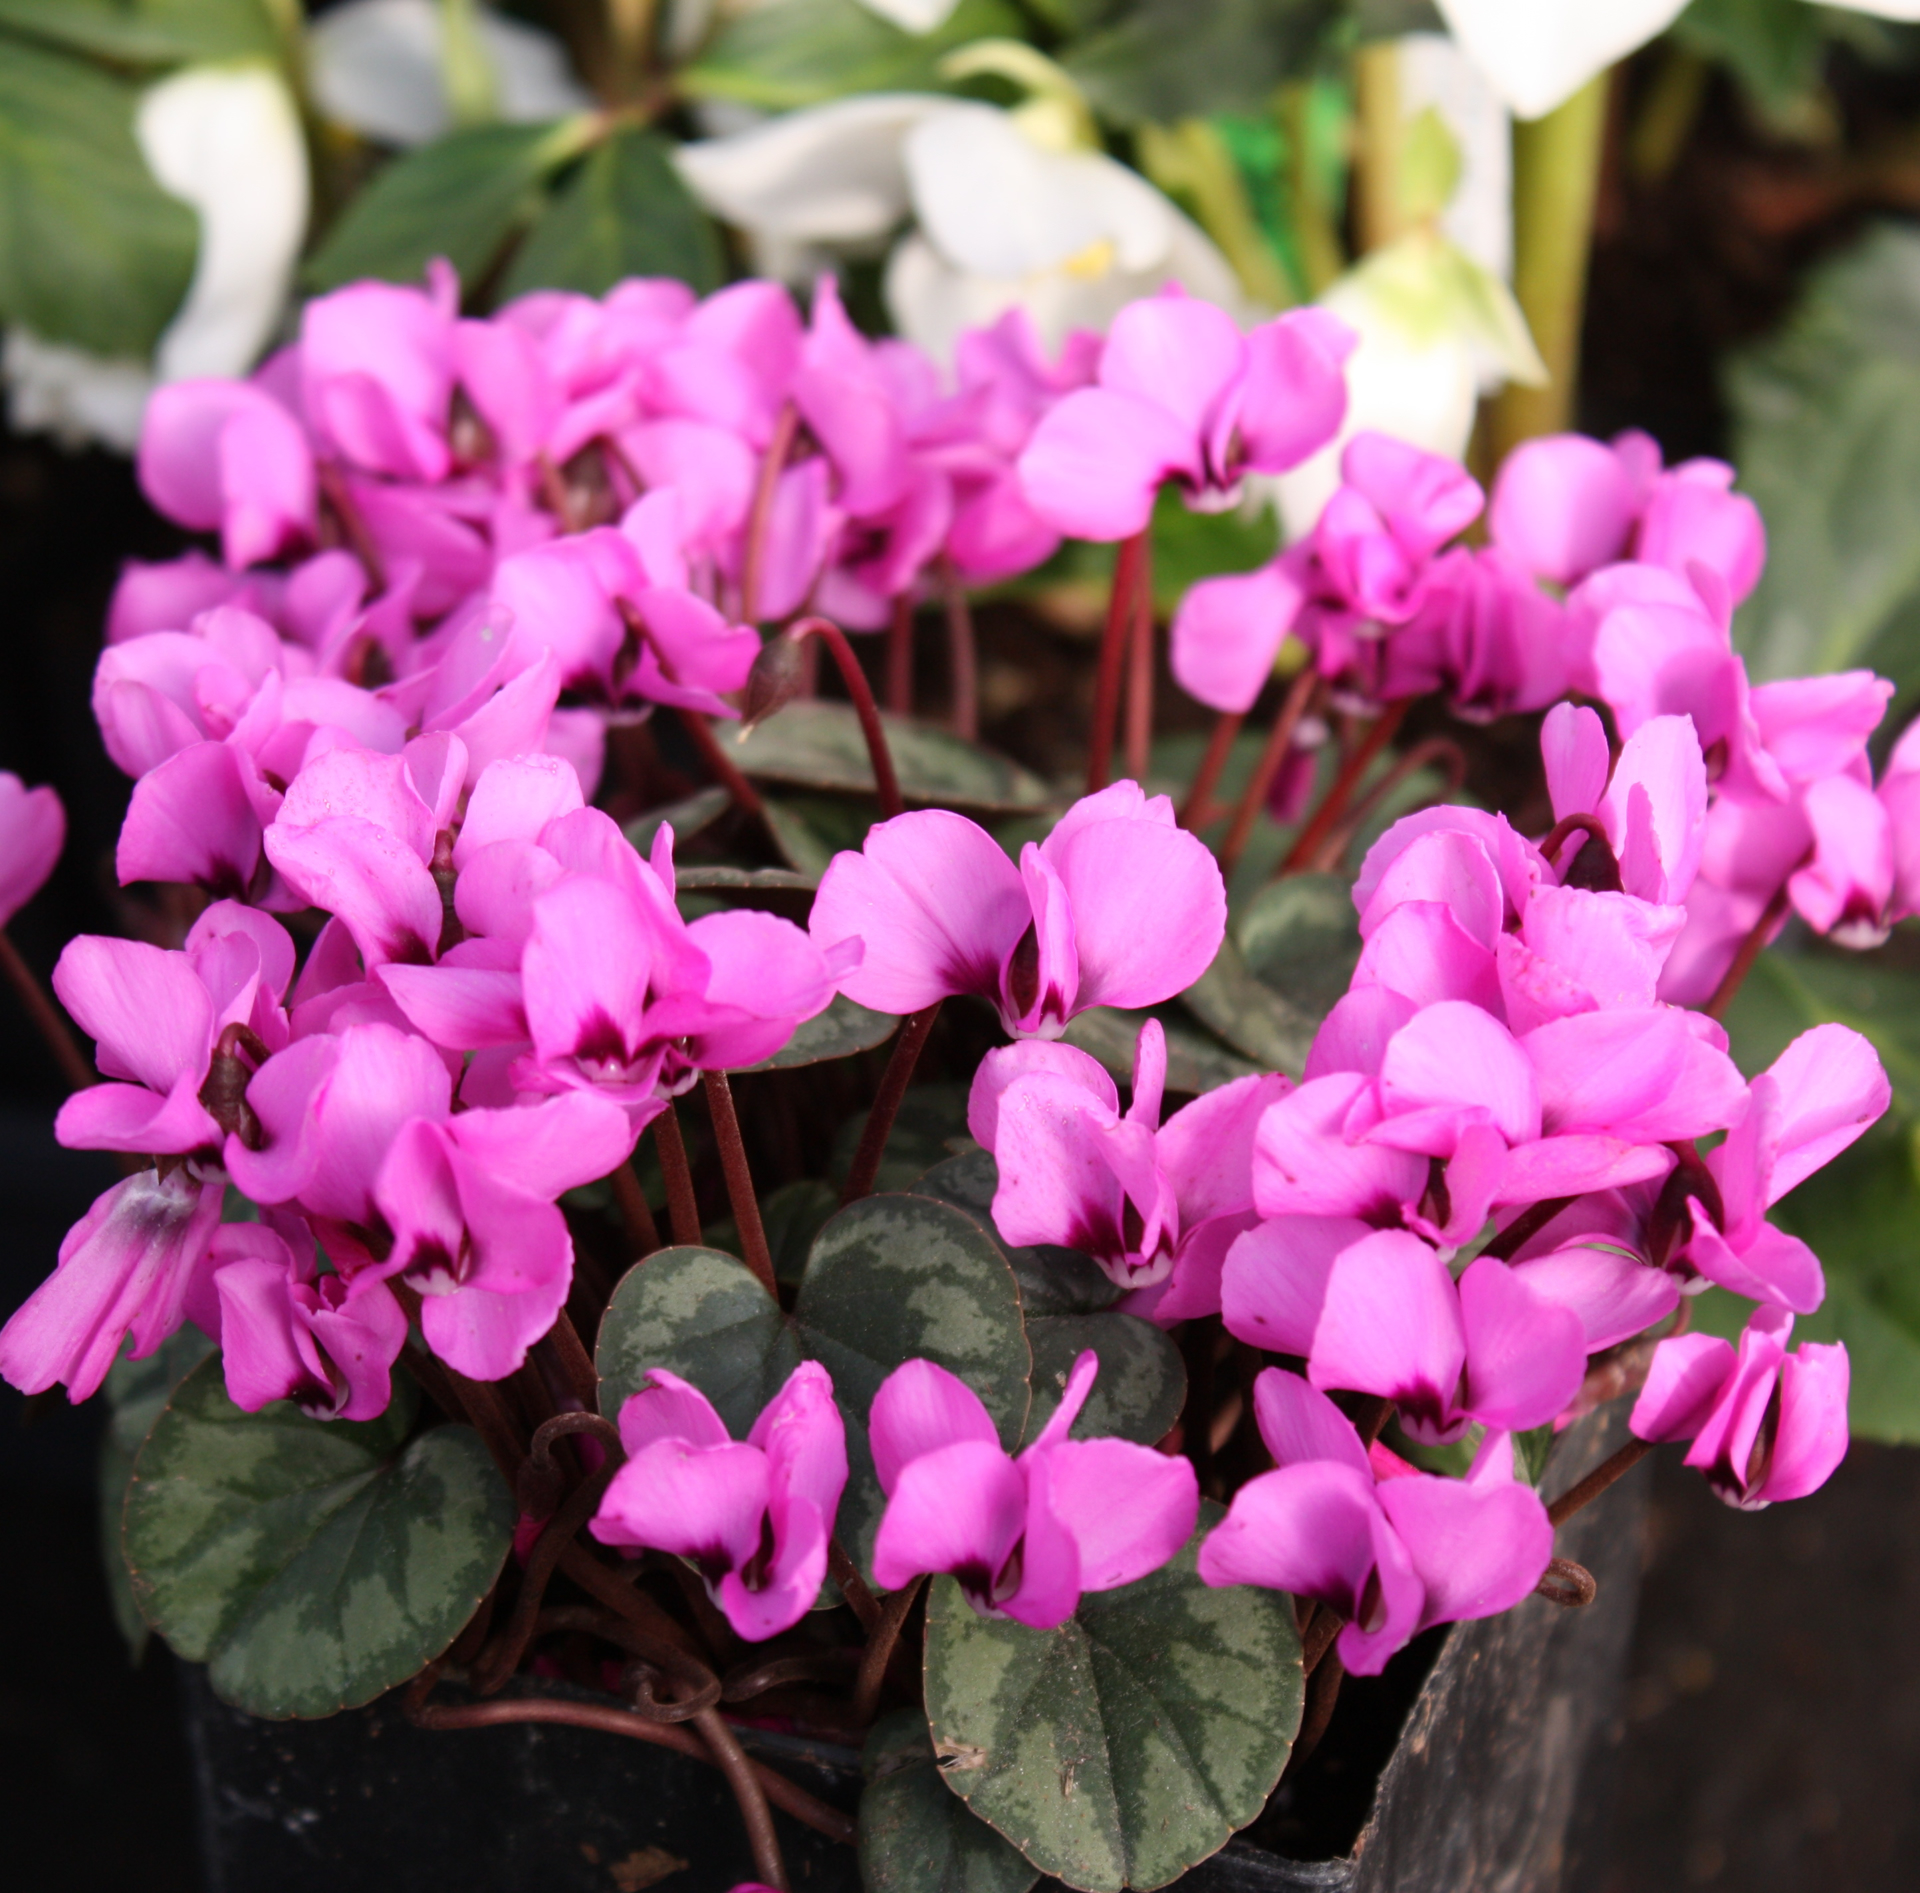 Cyclamen HEDERIFOLIUM Hardy Cyclamen with Decorative Leaves and Pink Flowers in Autumn and Spring Pot of 3 First Year SEEDLINGS.